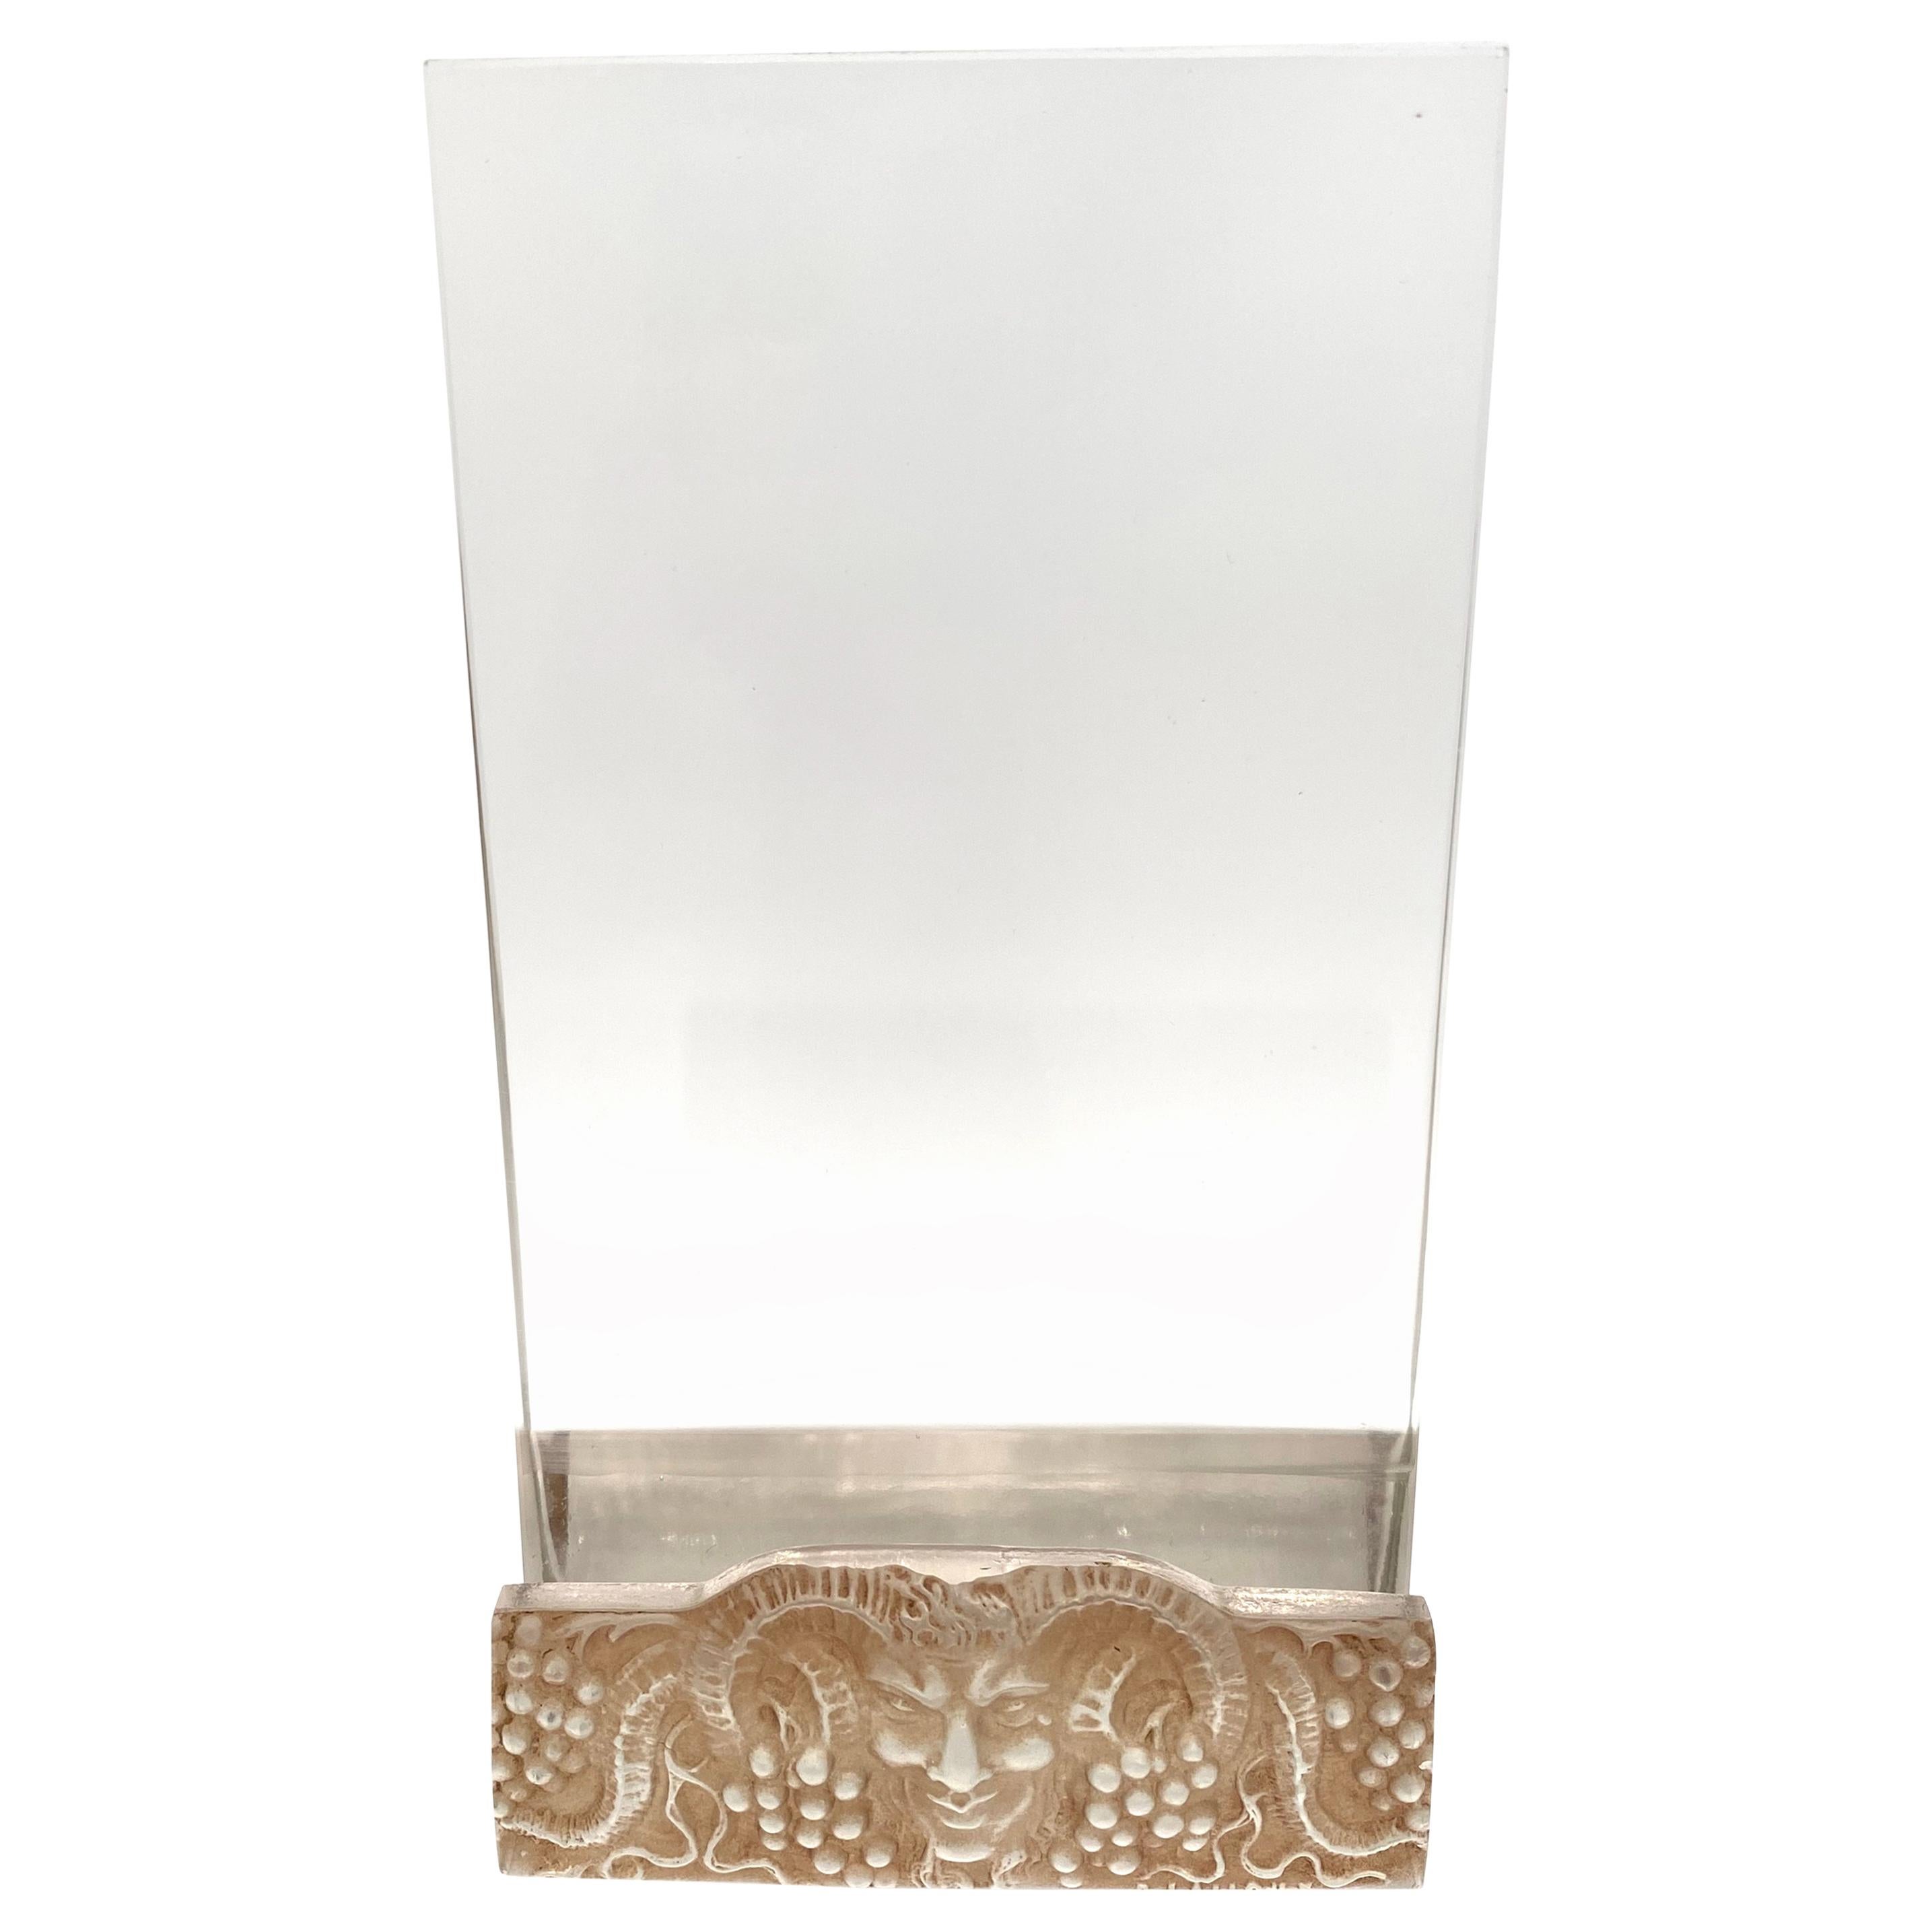 1928 René Lalique Faune Menu Holder Clear Glass with Sepia Patina